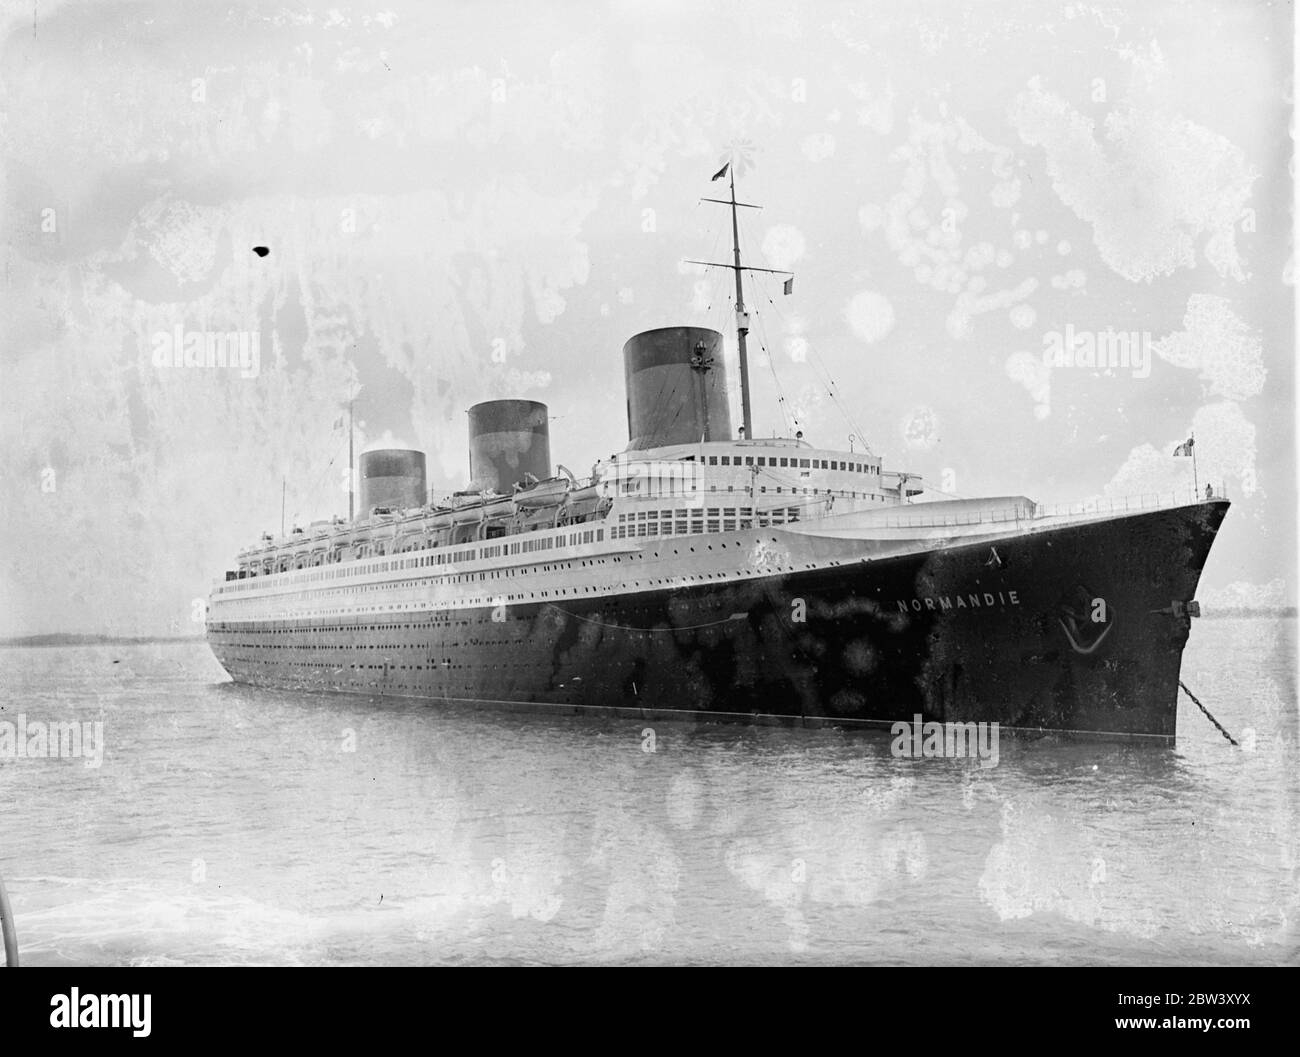 ' Normandie ' leaves Southampton for America after after strike hold up . May attempt record . After being held up for 15 hours by a French shipping strike , the ' Normandie ' left Southampton for New York on her first voyage of the season . It is expected that the French liner , which has been specially overhauled for the attempt , may break ' Queen Mary ' s ' record to make up lost time . Photo shows , the Normandie at Southampton . 11 March 1937 Stock Photo